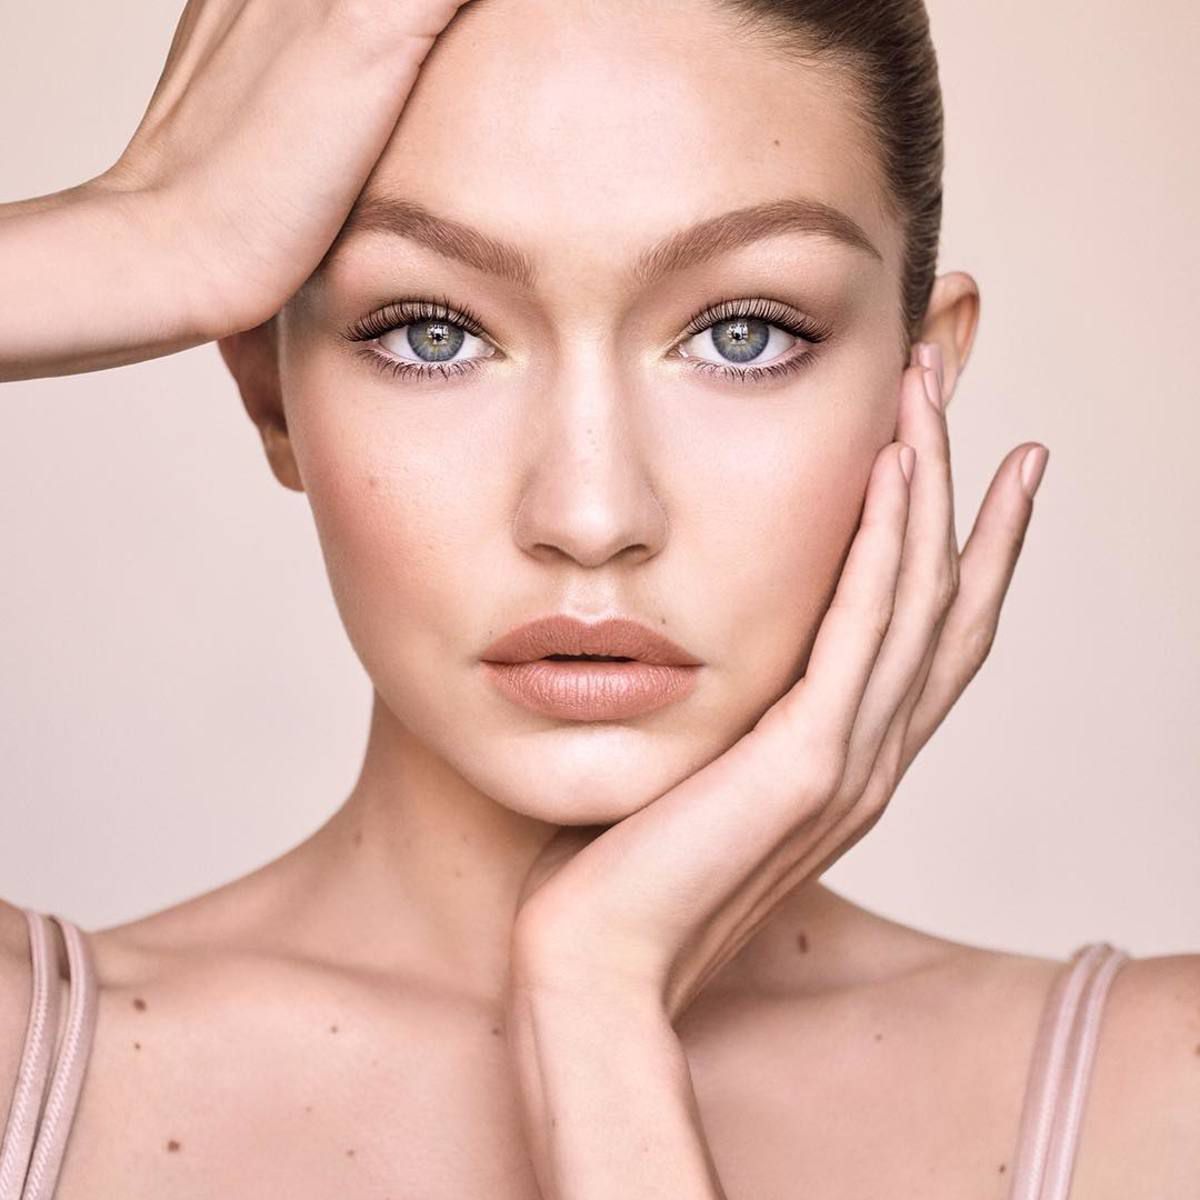 No Joke: These Drugstore Foundations Are Seriously the Best - No Joke: These Drugstore Foundations Are Seriously the Best -   13 beauty Shoot poses ideas